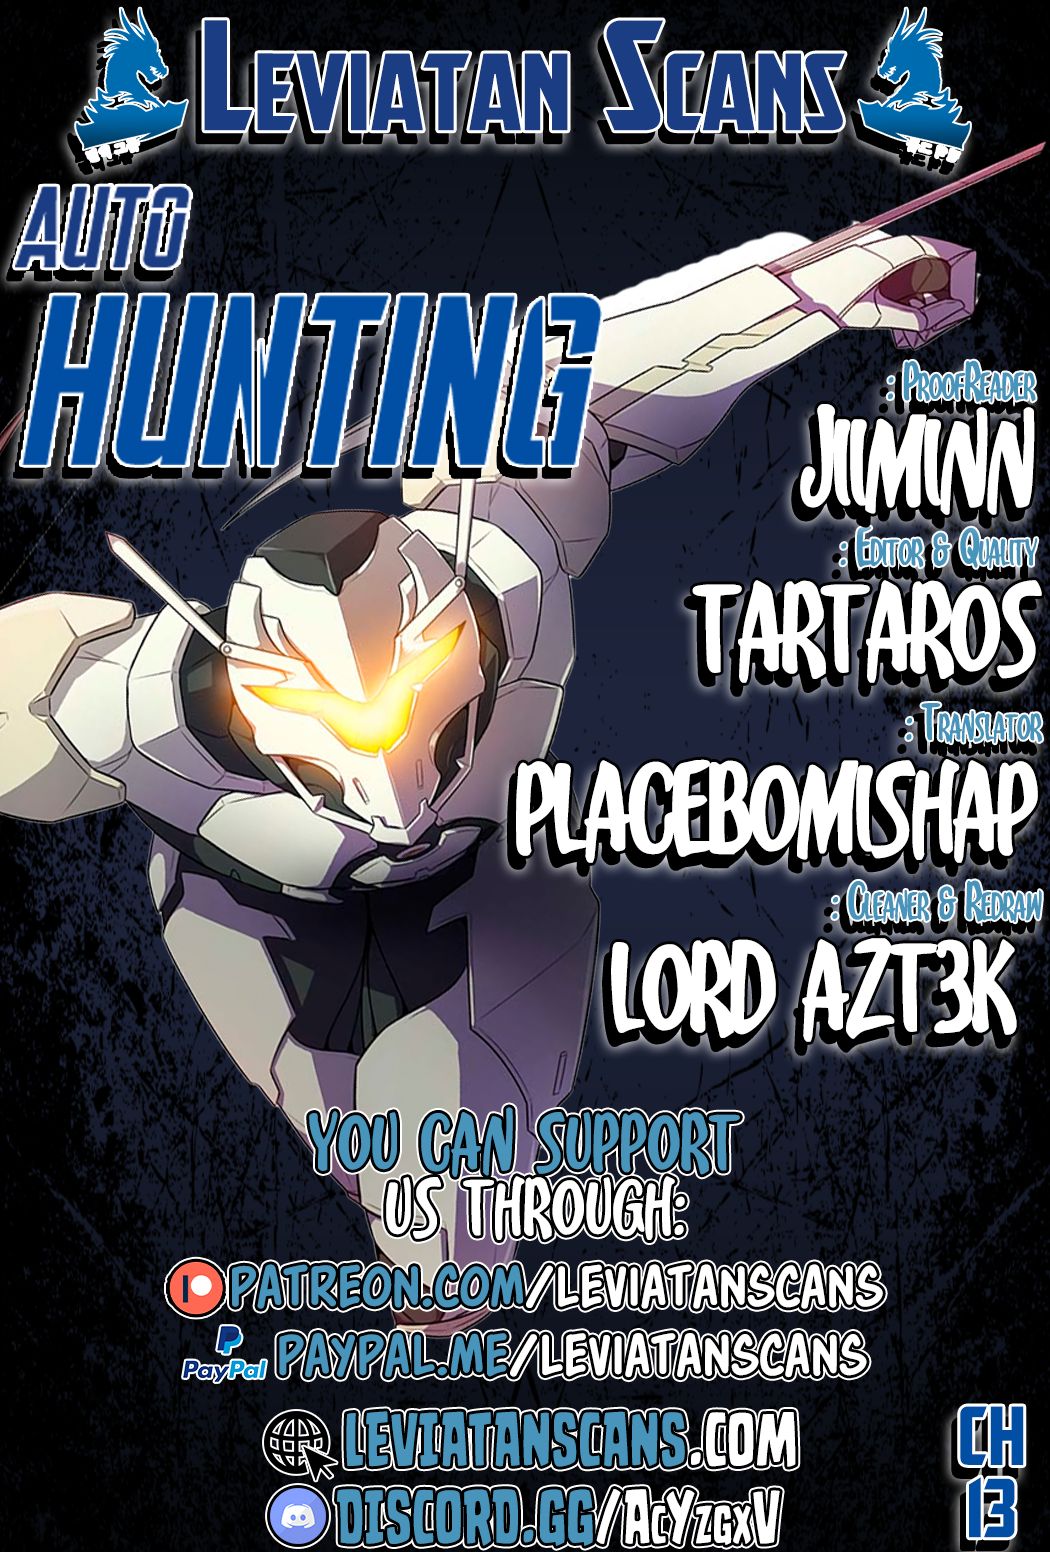 Auto Hunting Chapter 13